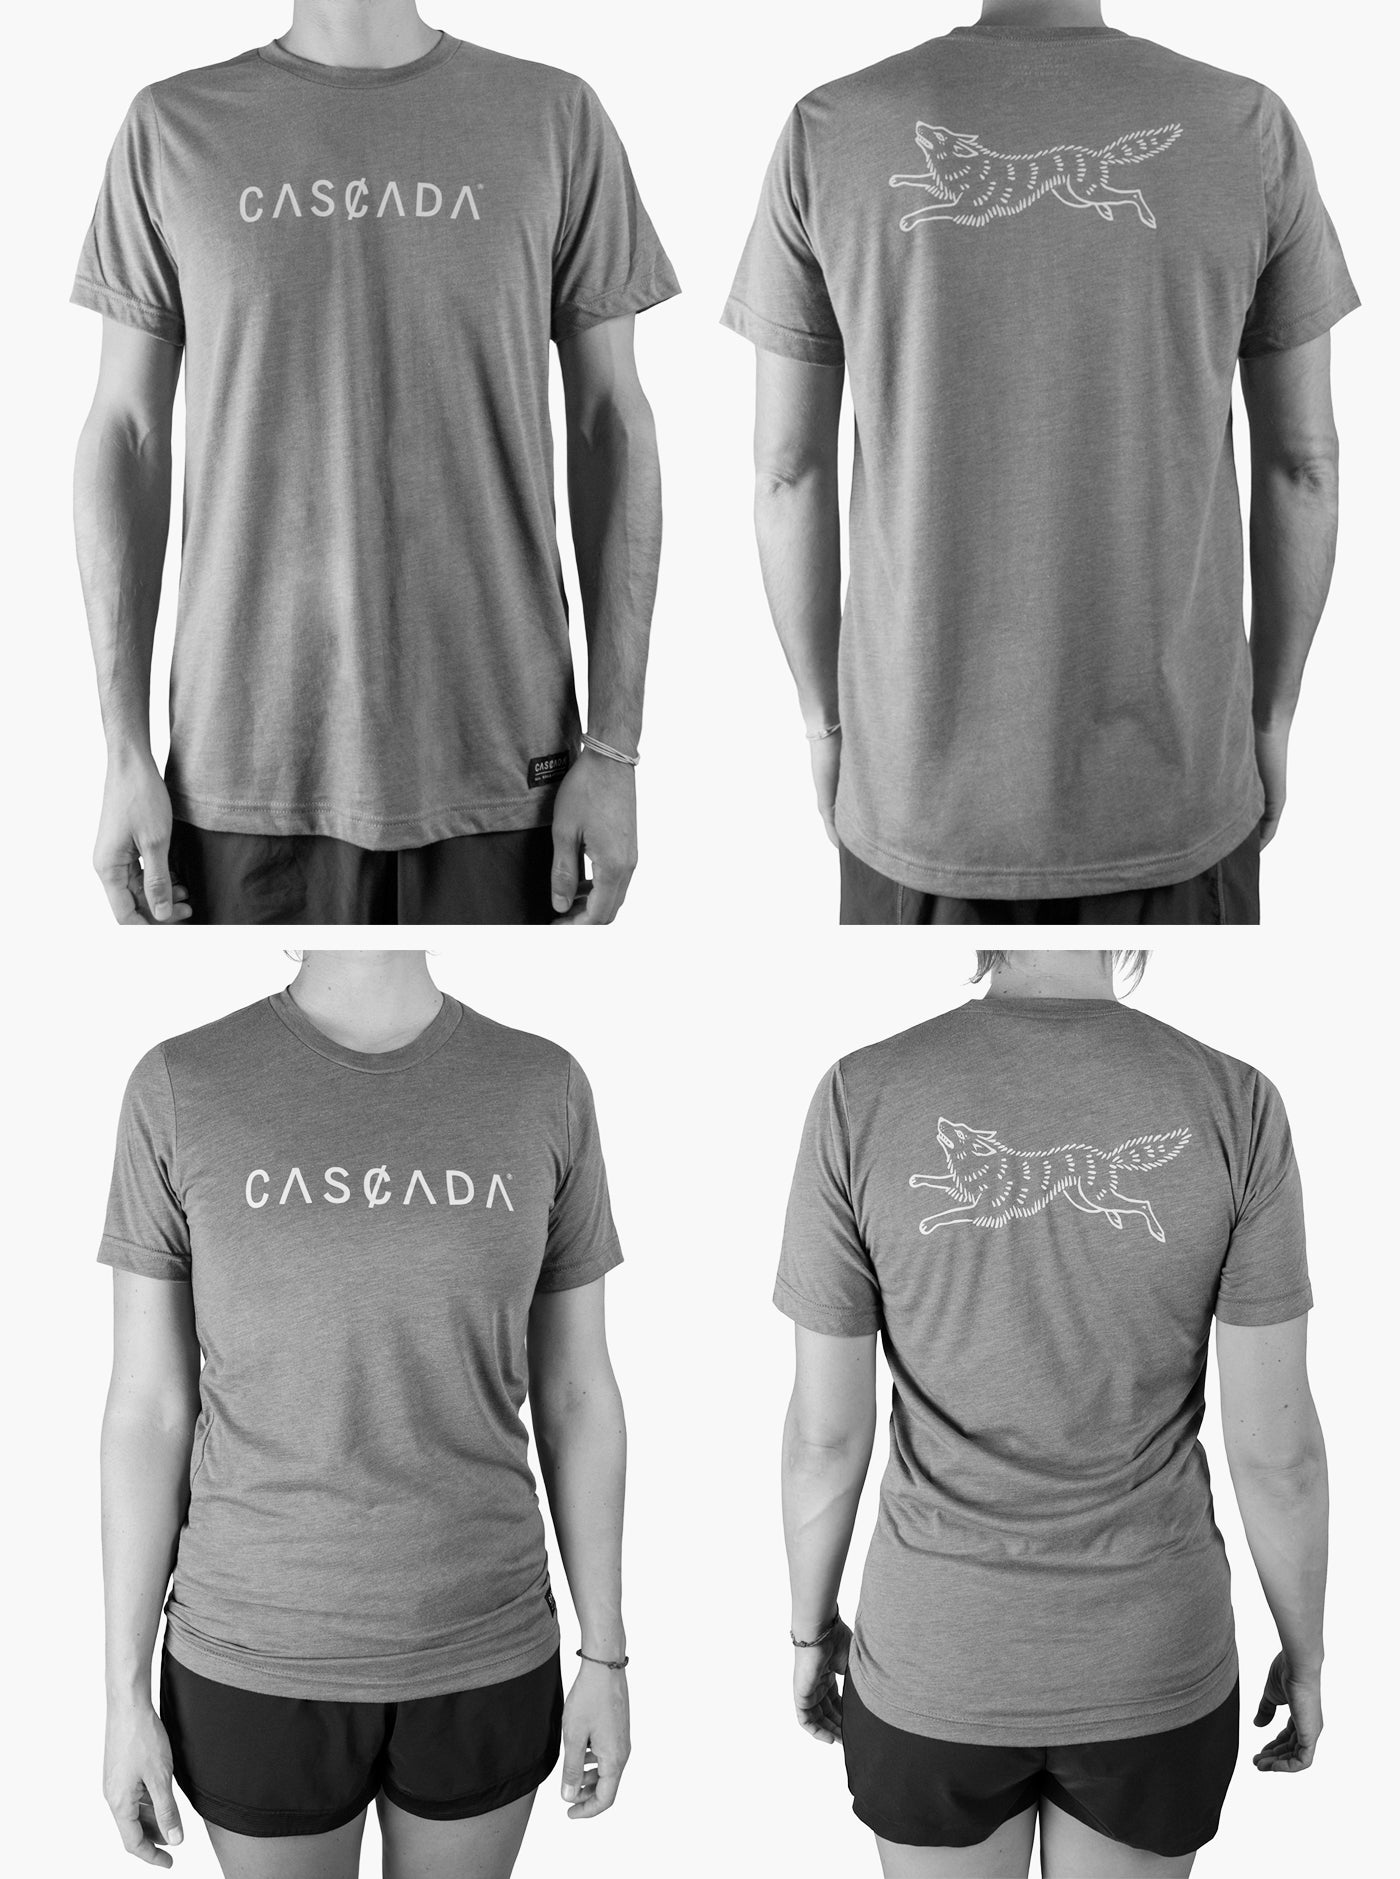 Escapade Unisex T-Shirt - Out Of Step